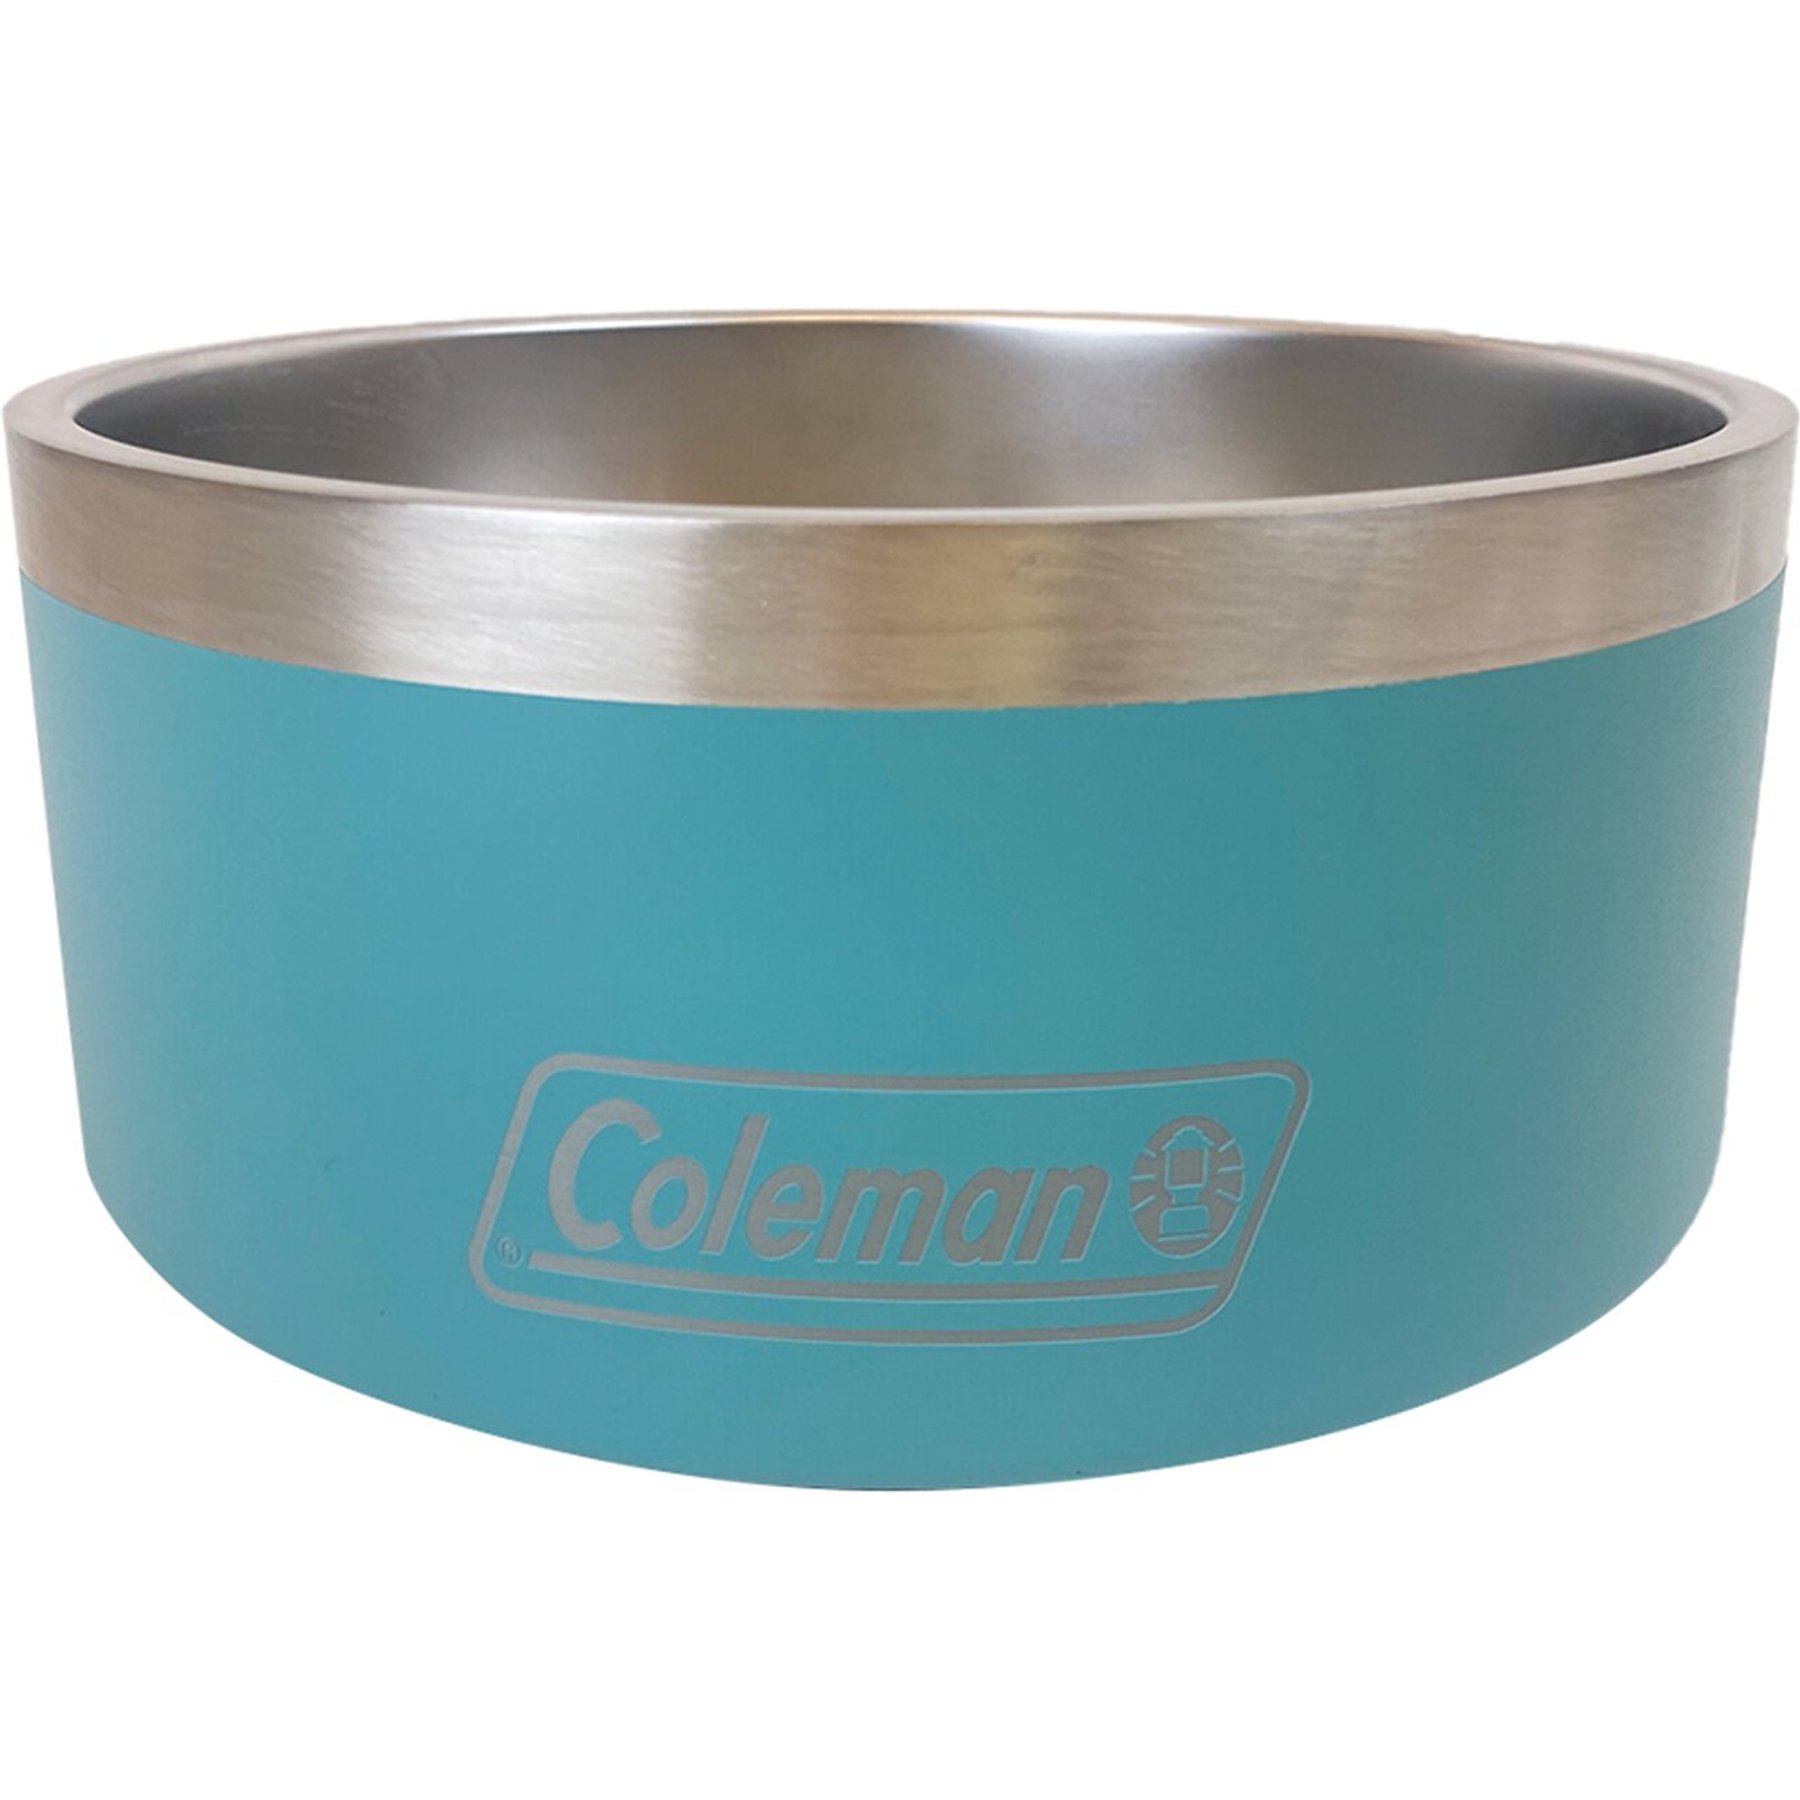 Bowl,　64-oz,　Dog　Steel　Stainless　COLEMAN　Teal